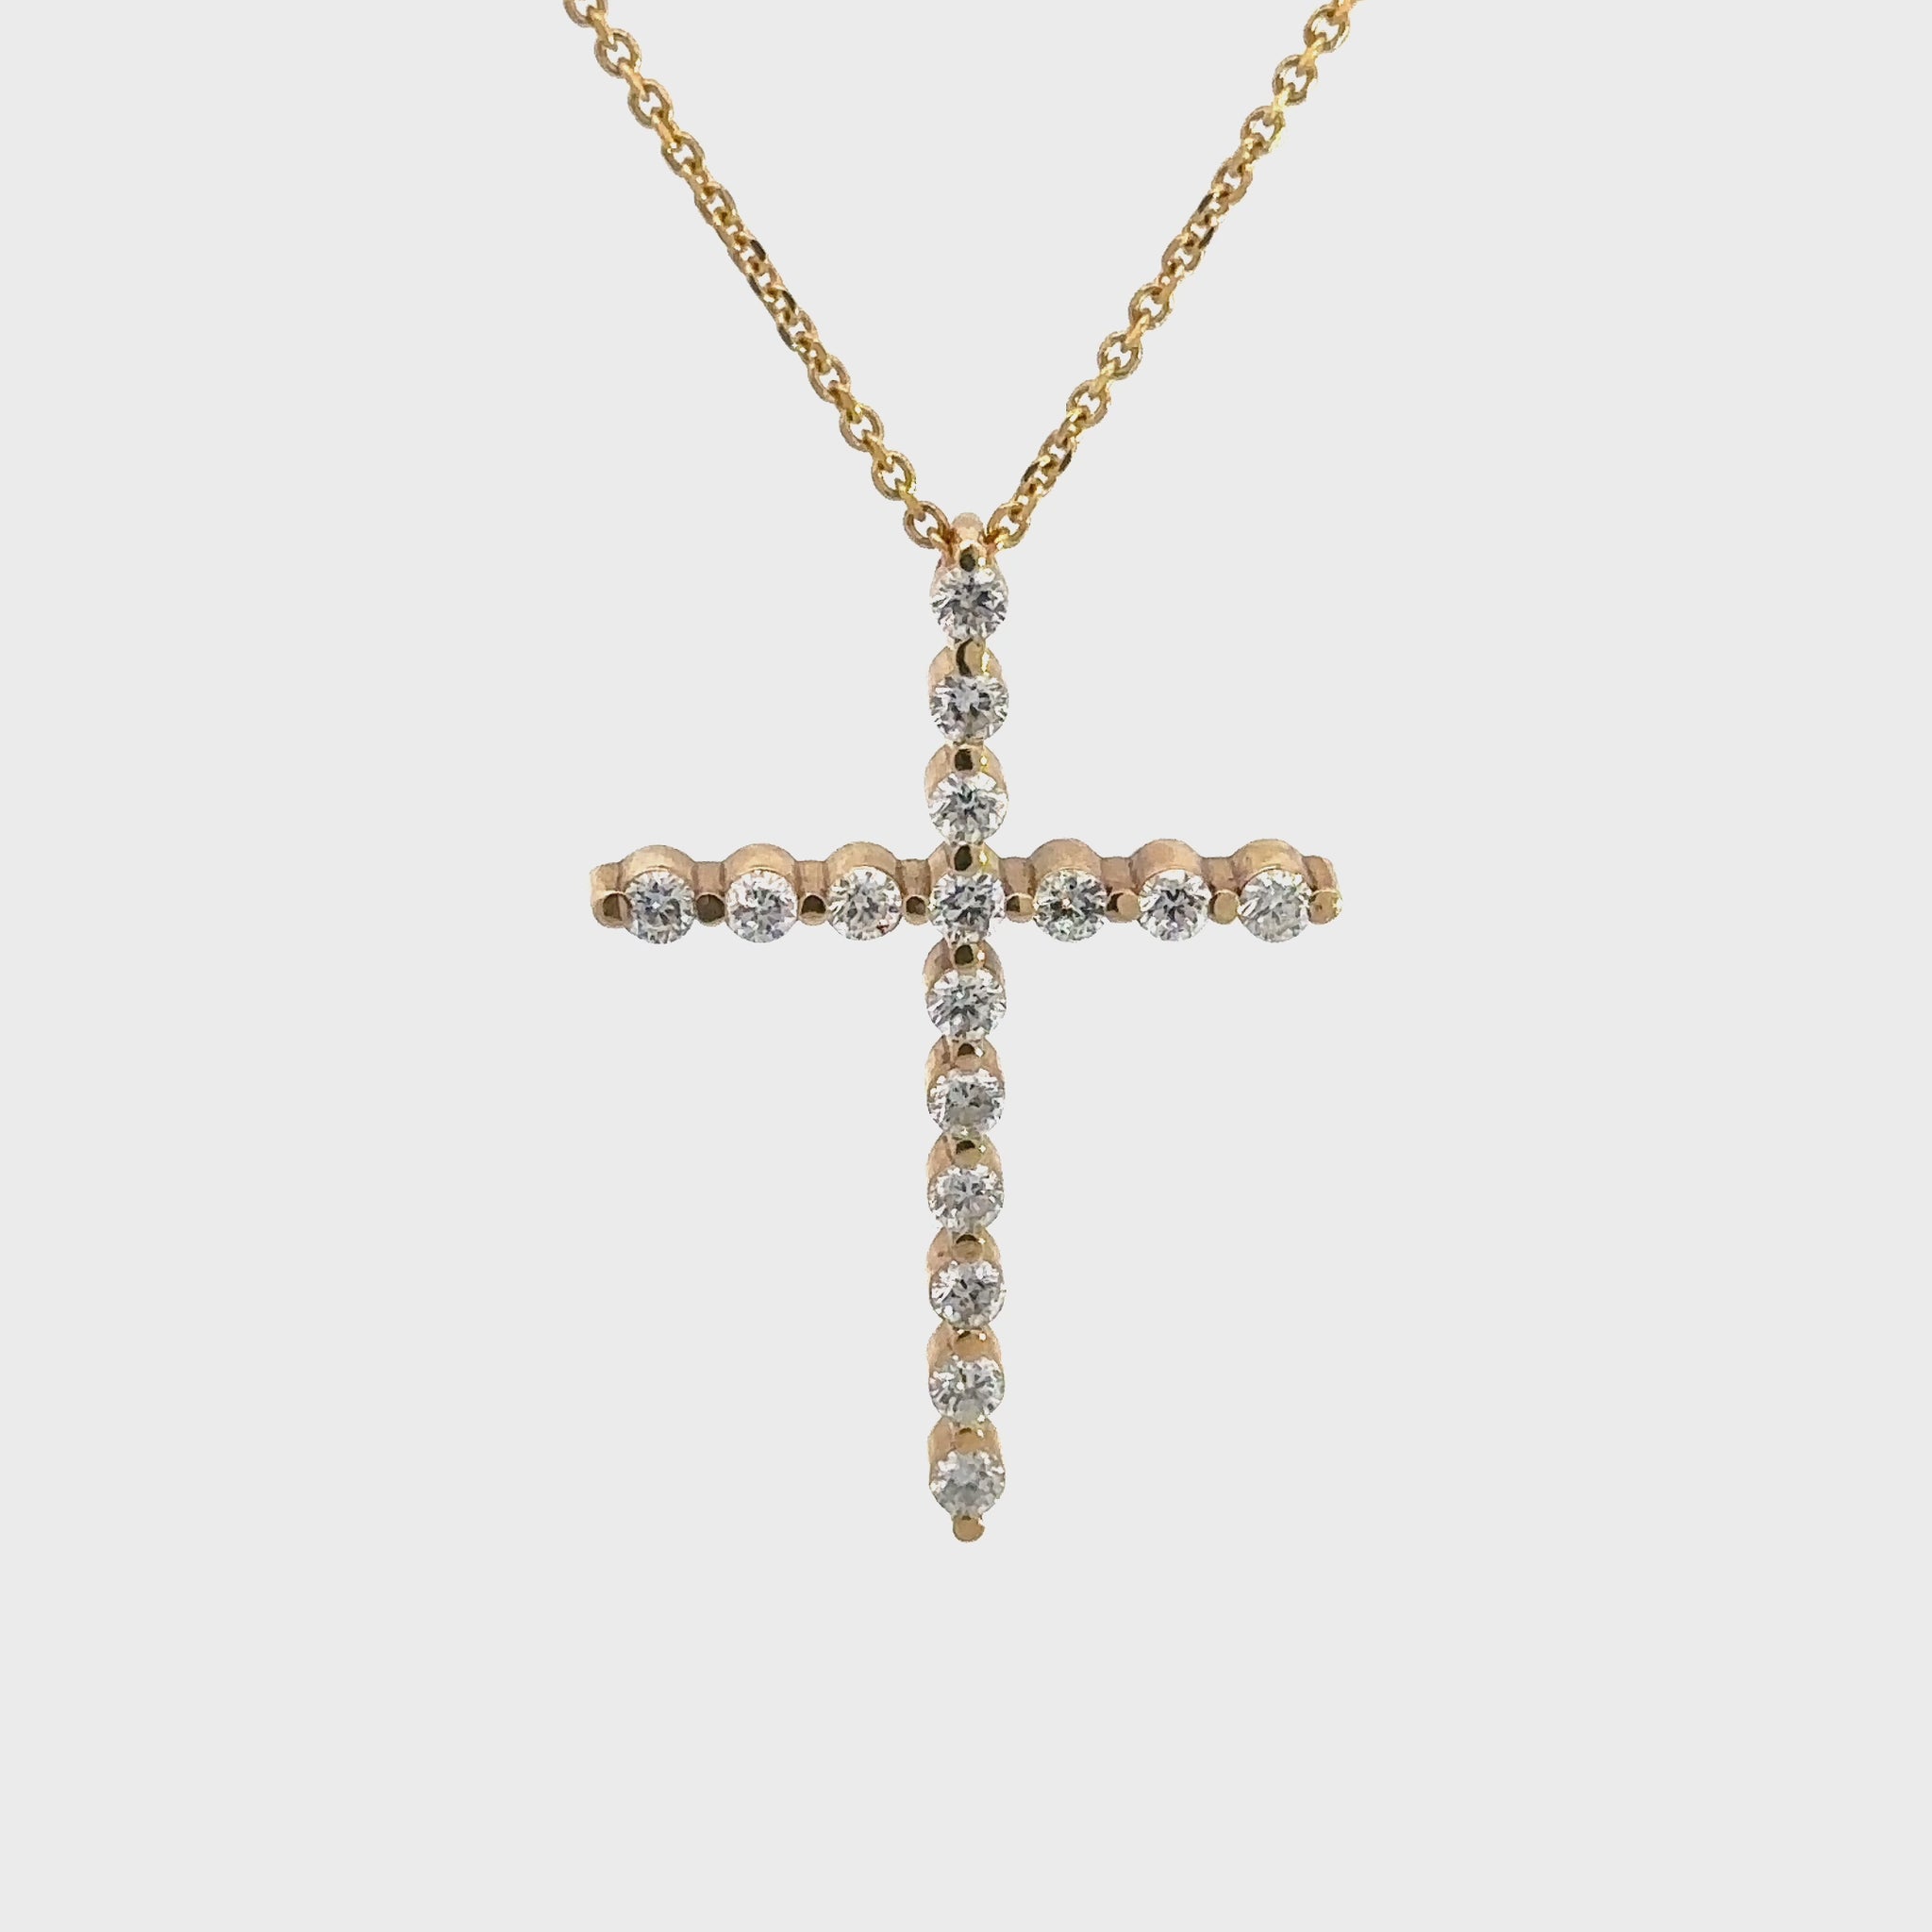 360 Video of diamond cross necklace with thin link chain